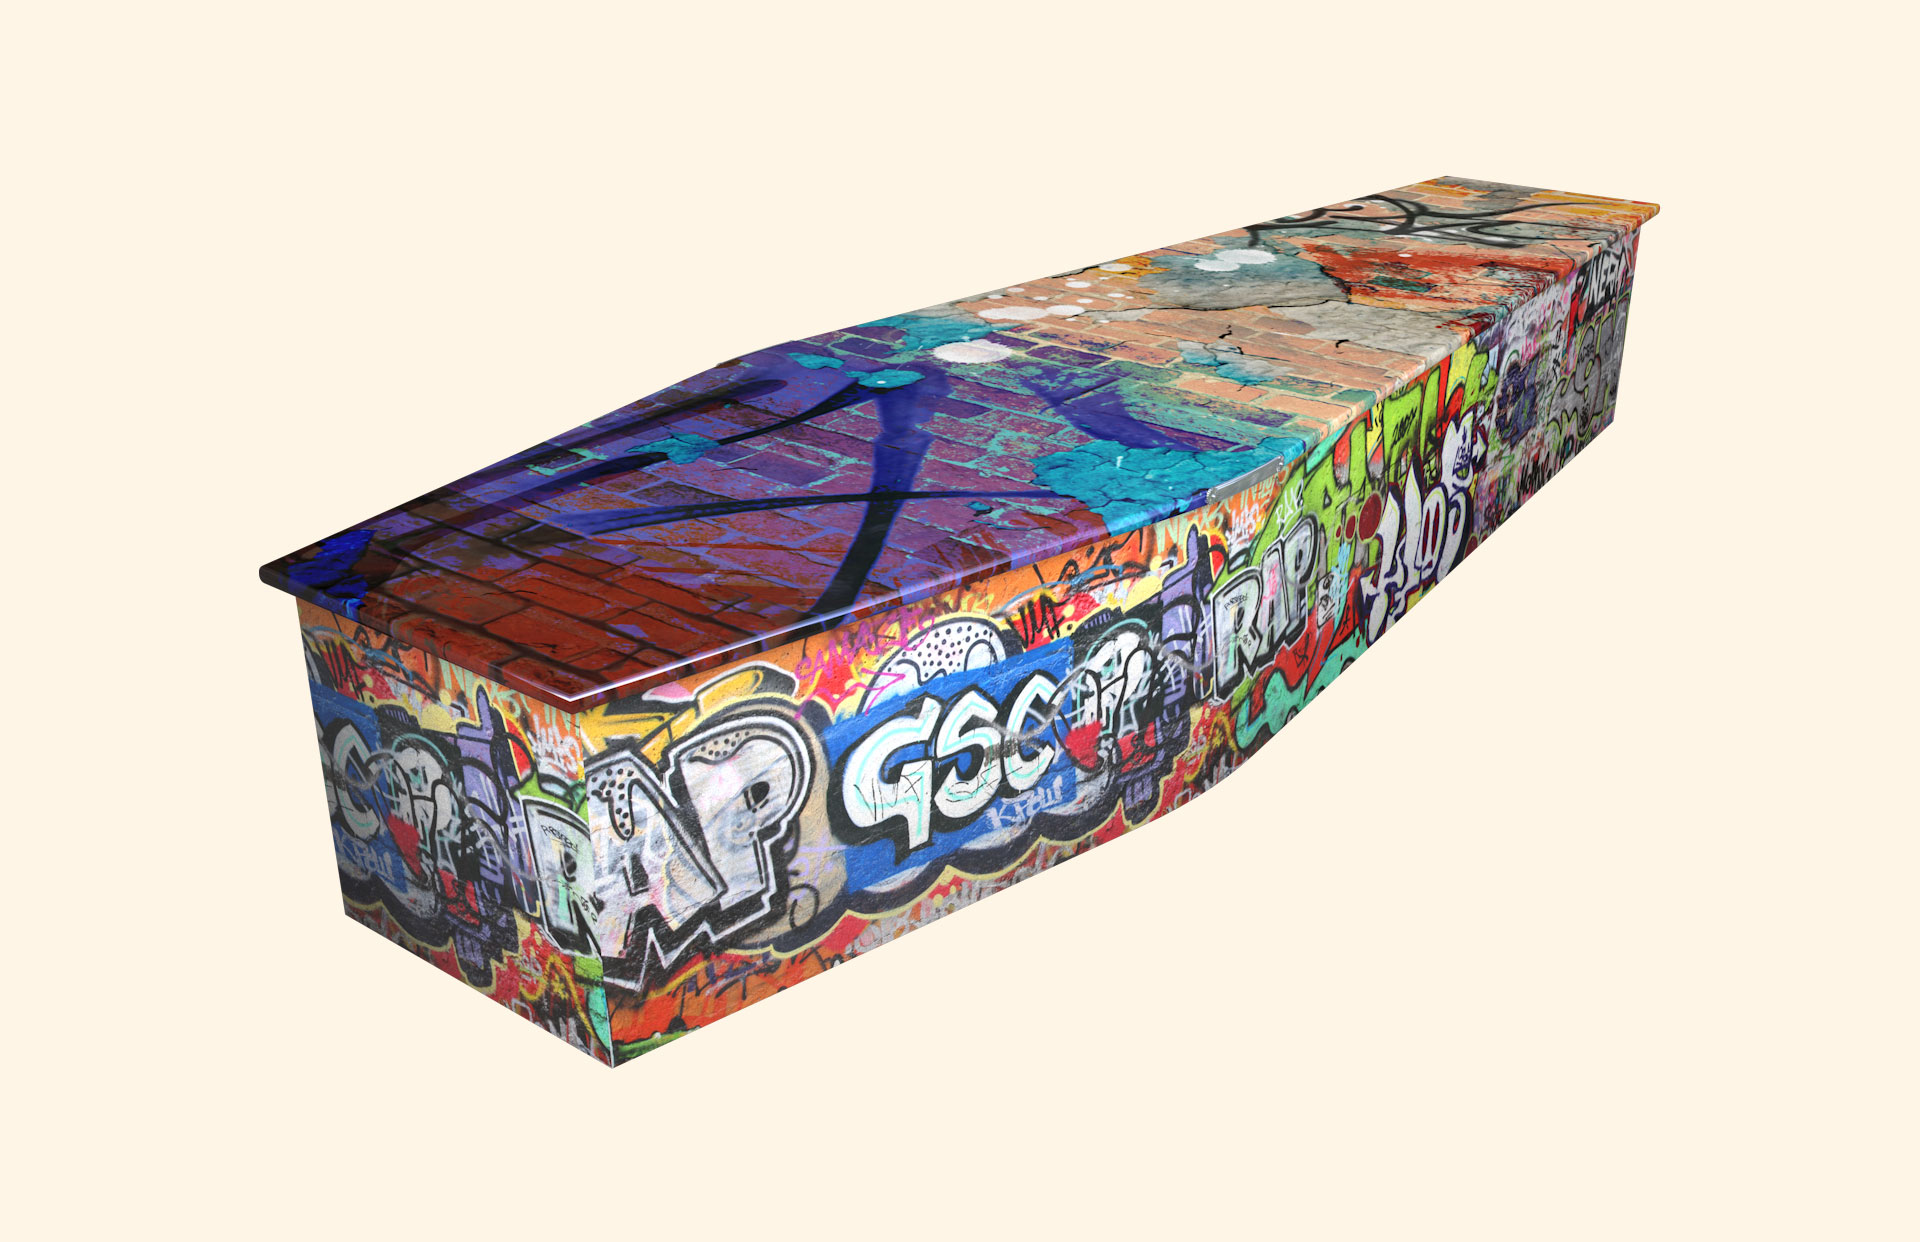 Street Art design on a traditional coffin